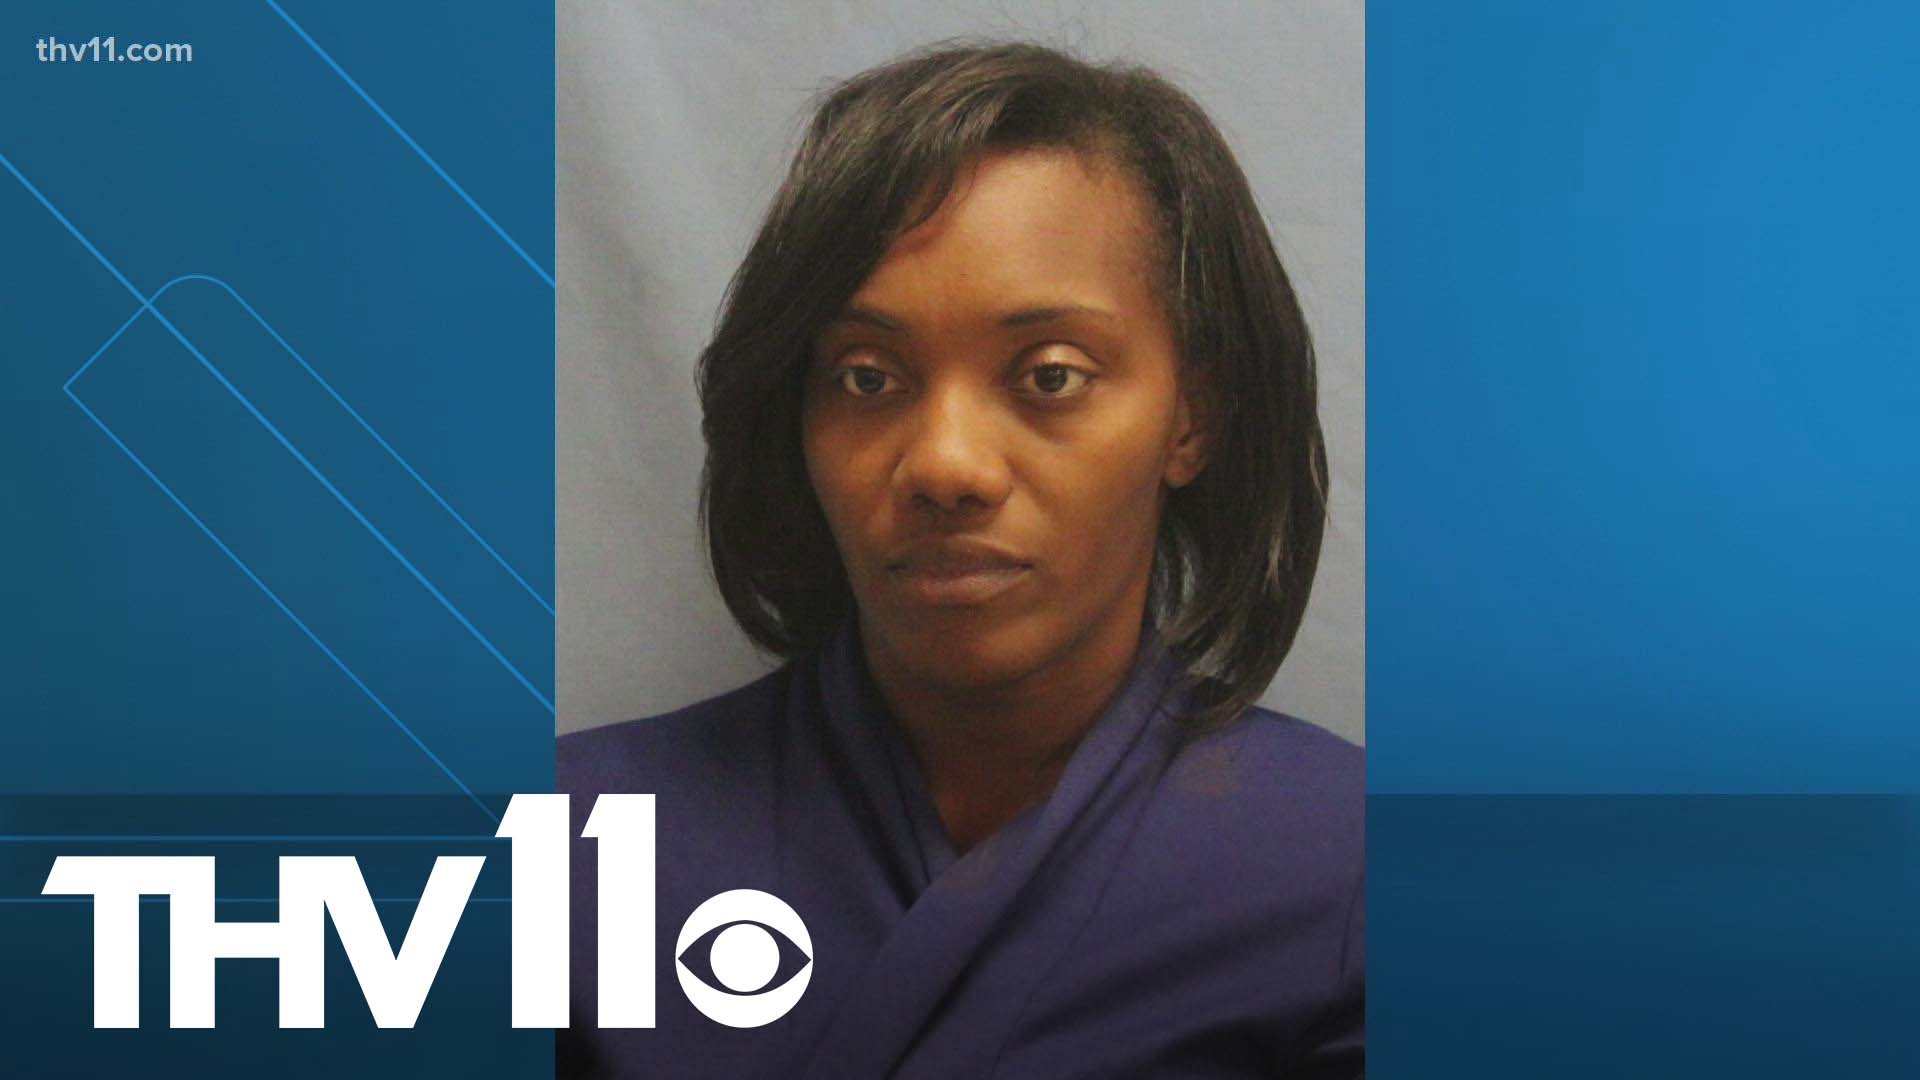 LRPD confirm that Diamond Arnold-Johnson, a Democratic candidate running for Auditor of State, has been arrested for first-degree terroristic threatening.